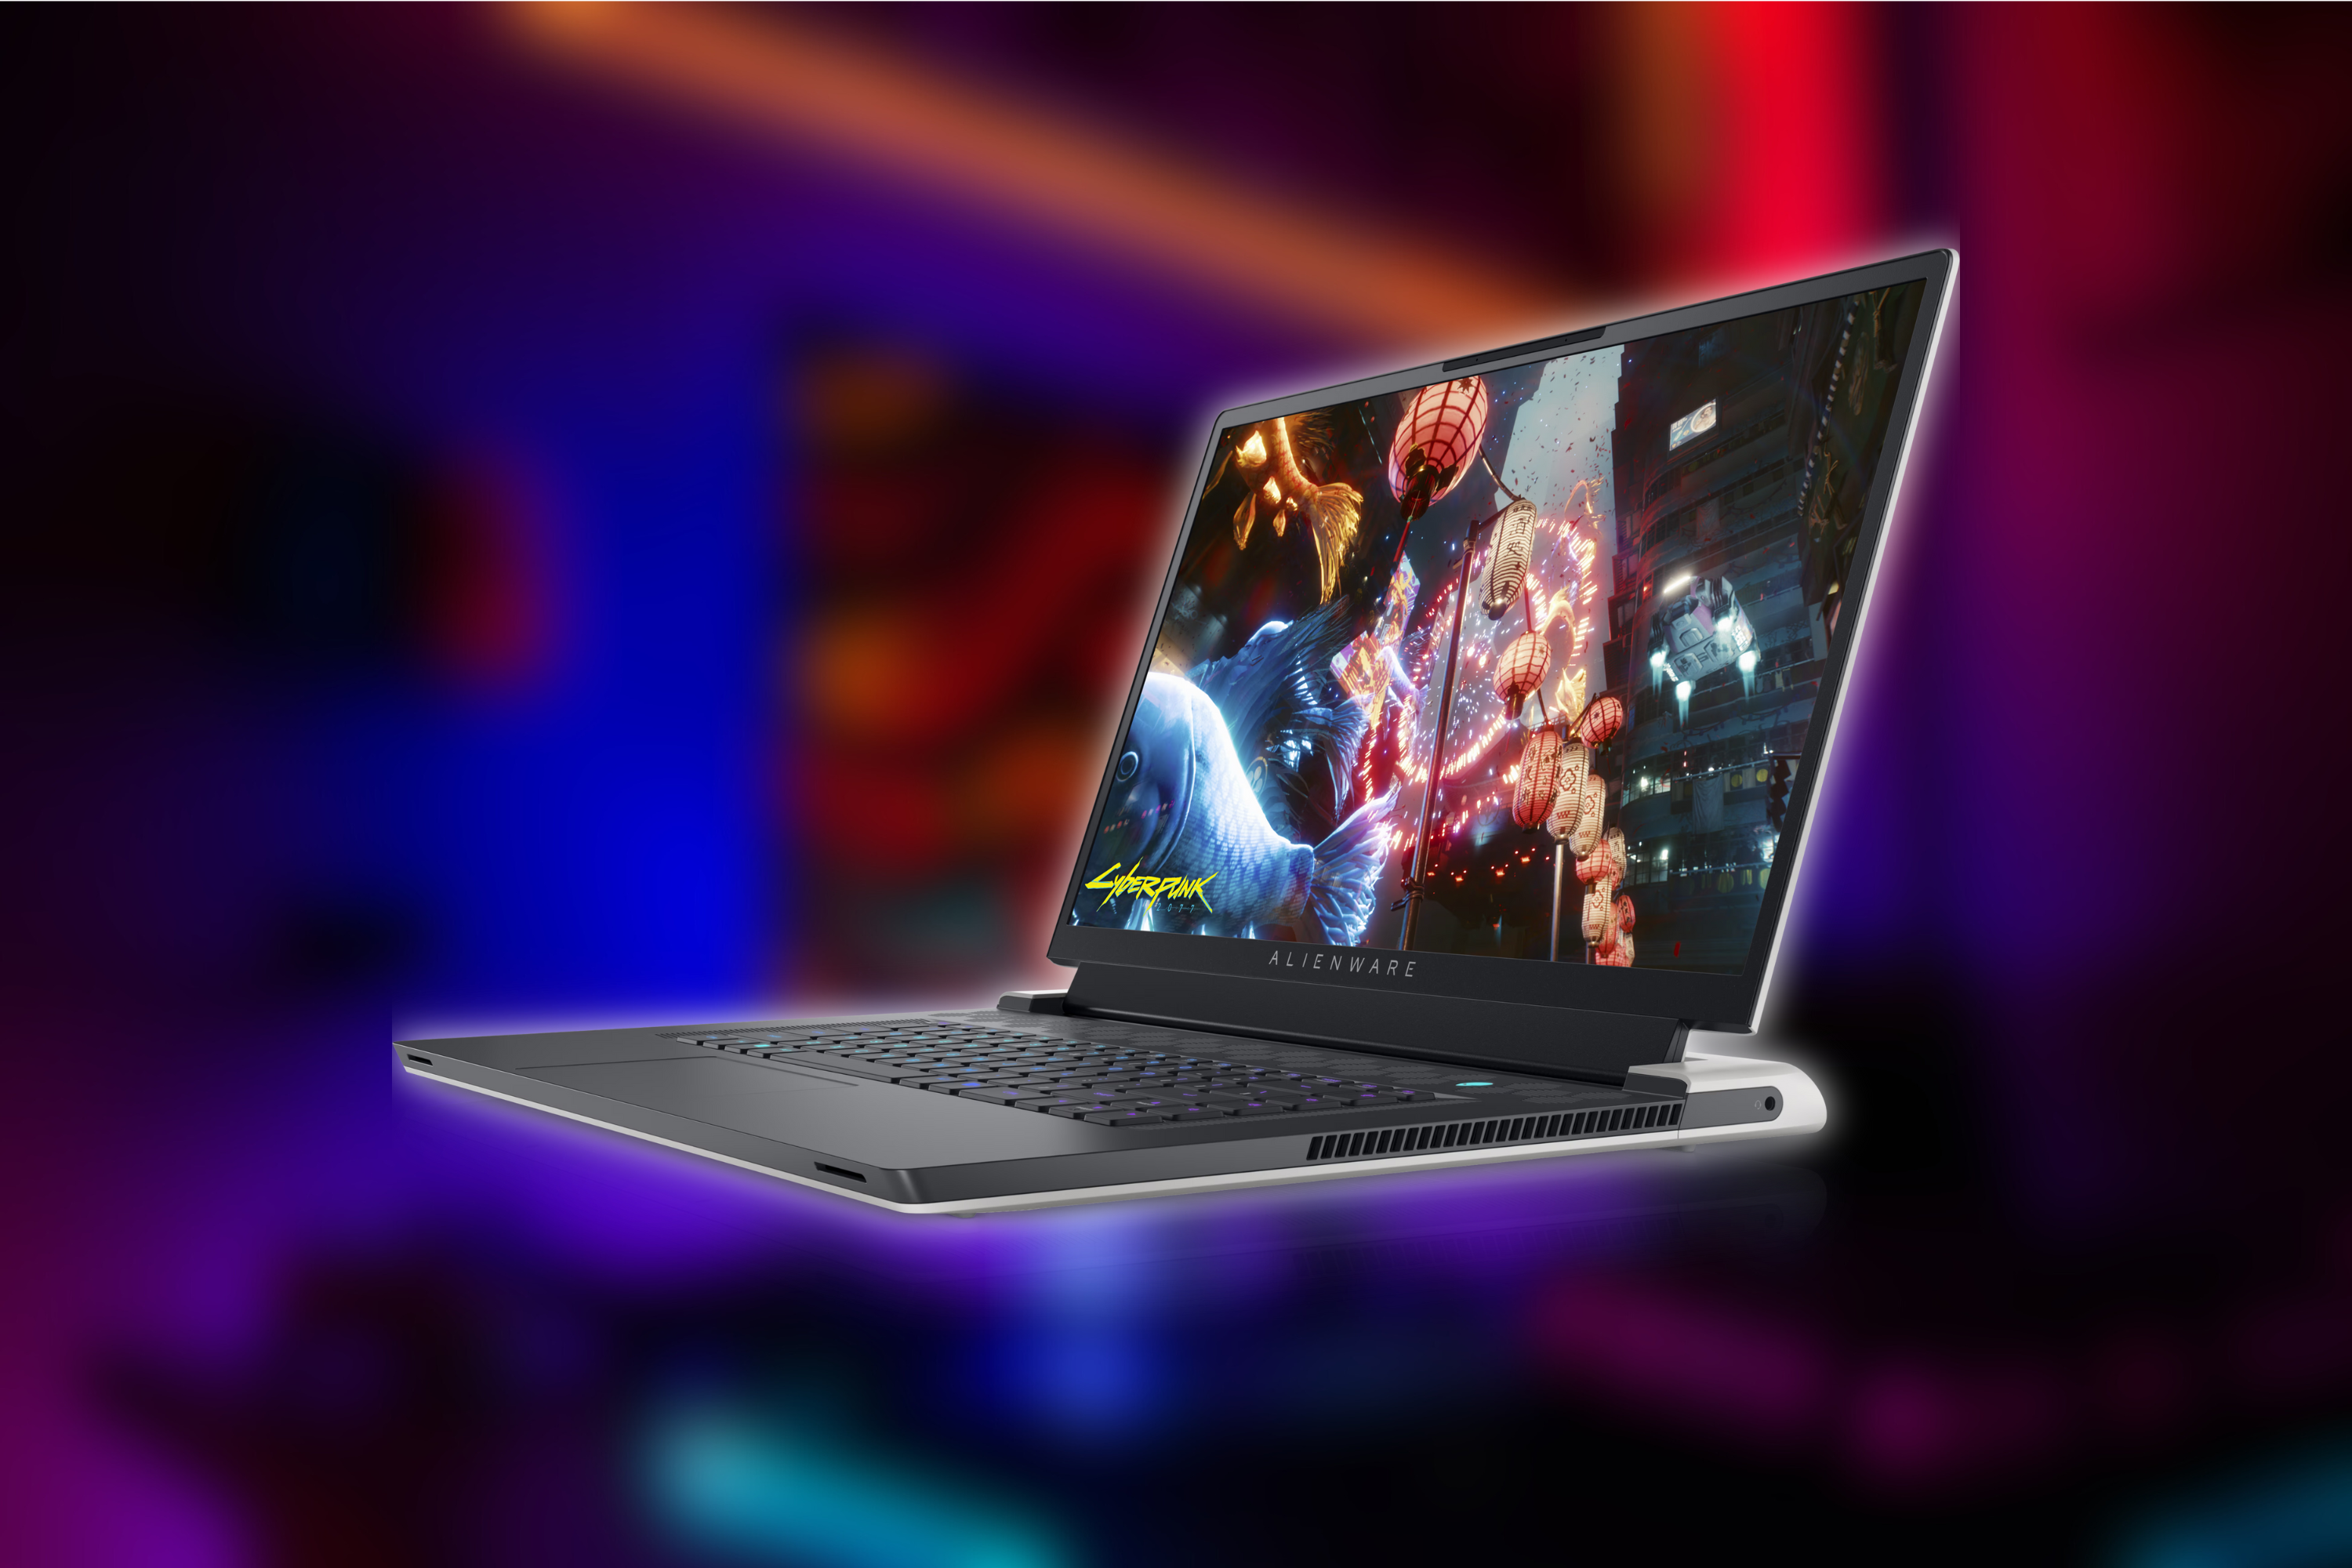 Alienware x17 R2 Gaming Laptop on blurred background that looks like a gaming room